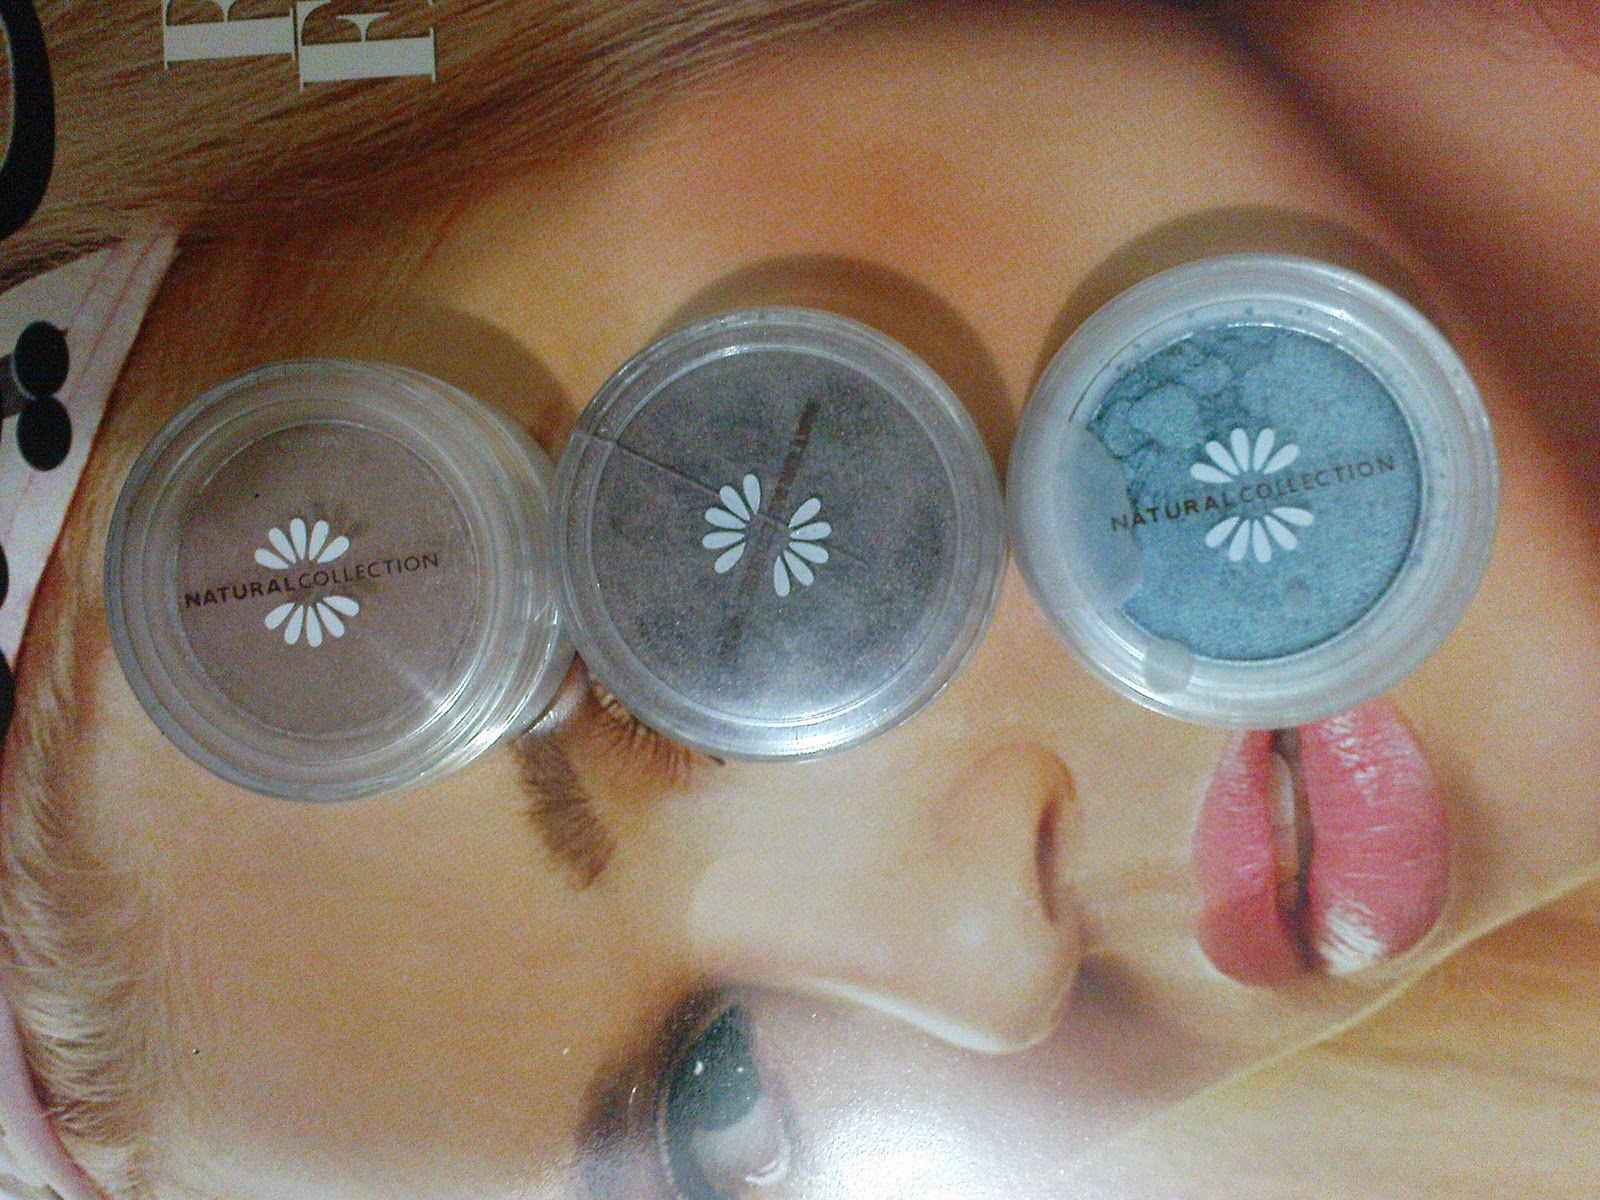  Makeup  passion Natural  Collection  Eyeshadow